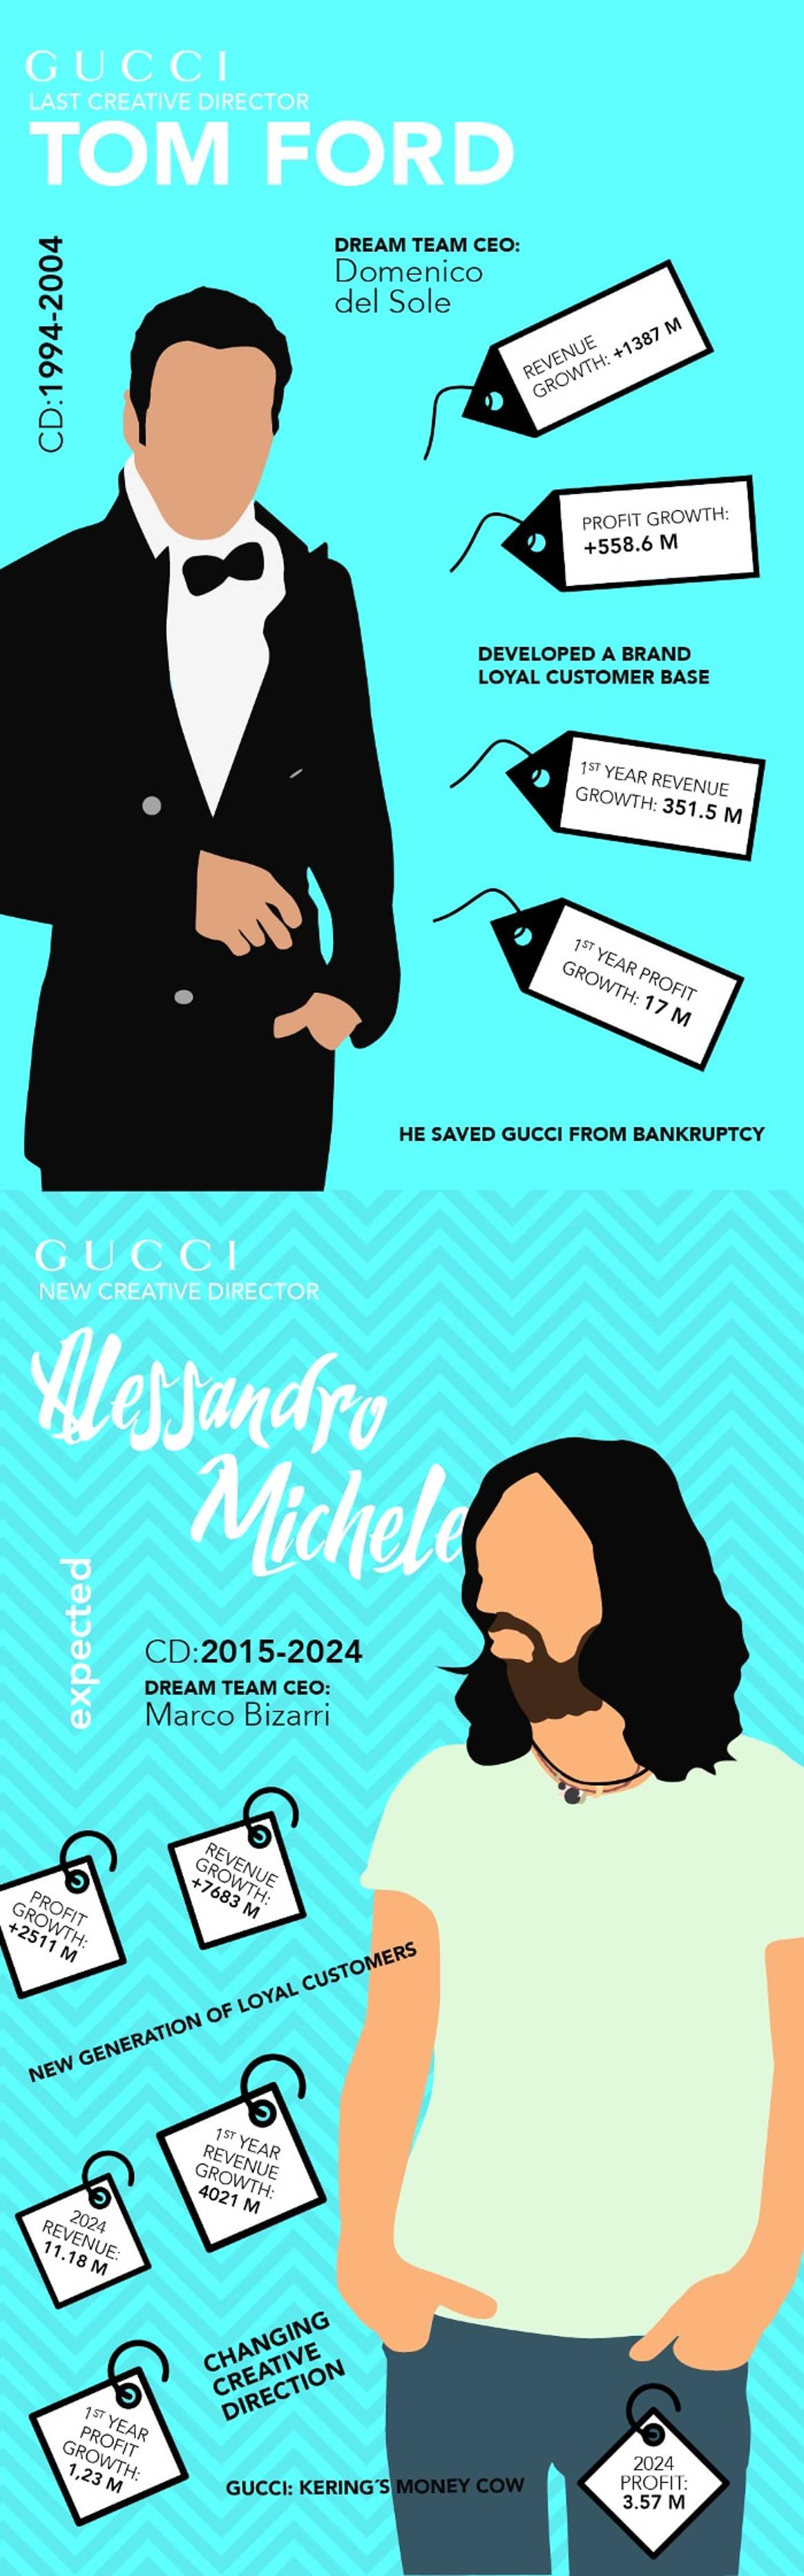 Infographic - Geek-chic vs Sex-bomb: the differences between Gucci’s Alessandro Michele & Tom Ford